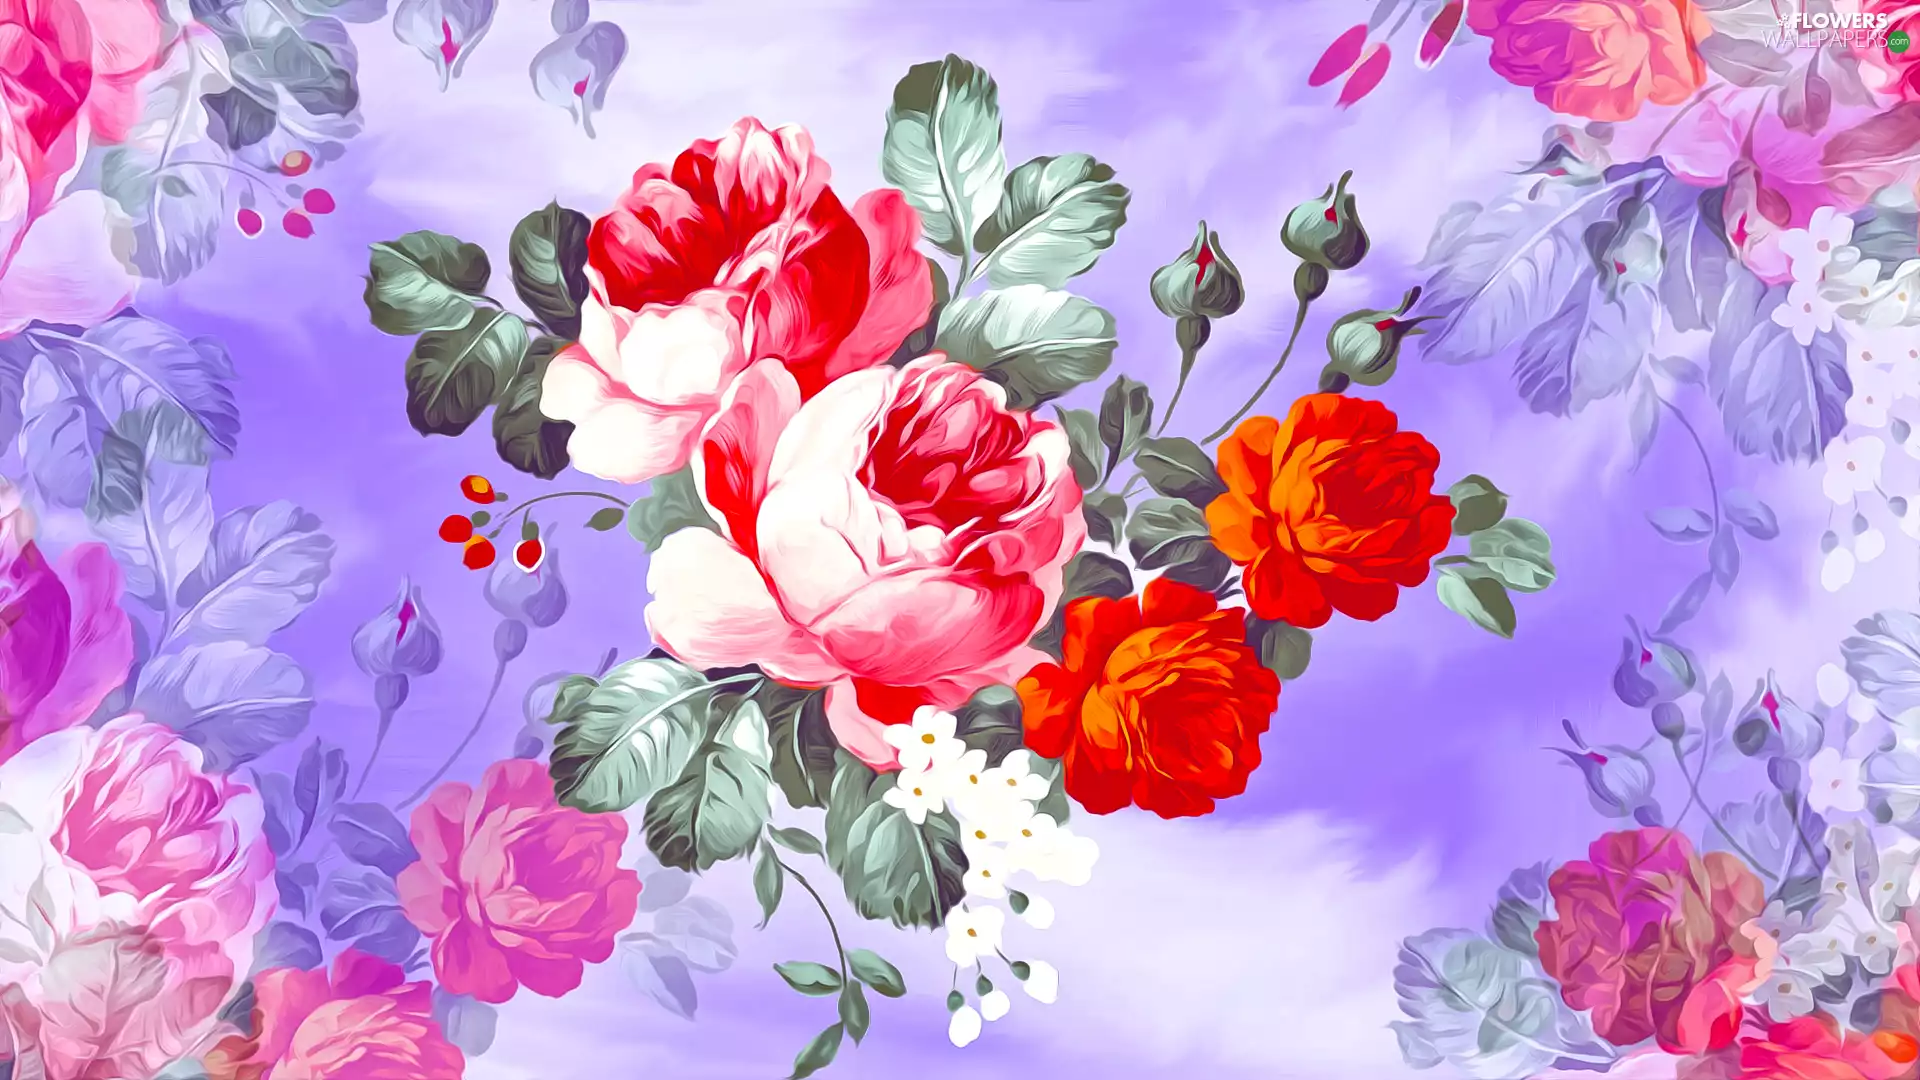 roses, graphics, Red, Pink, Flowers